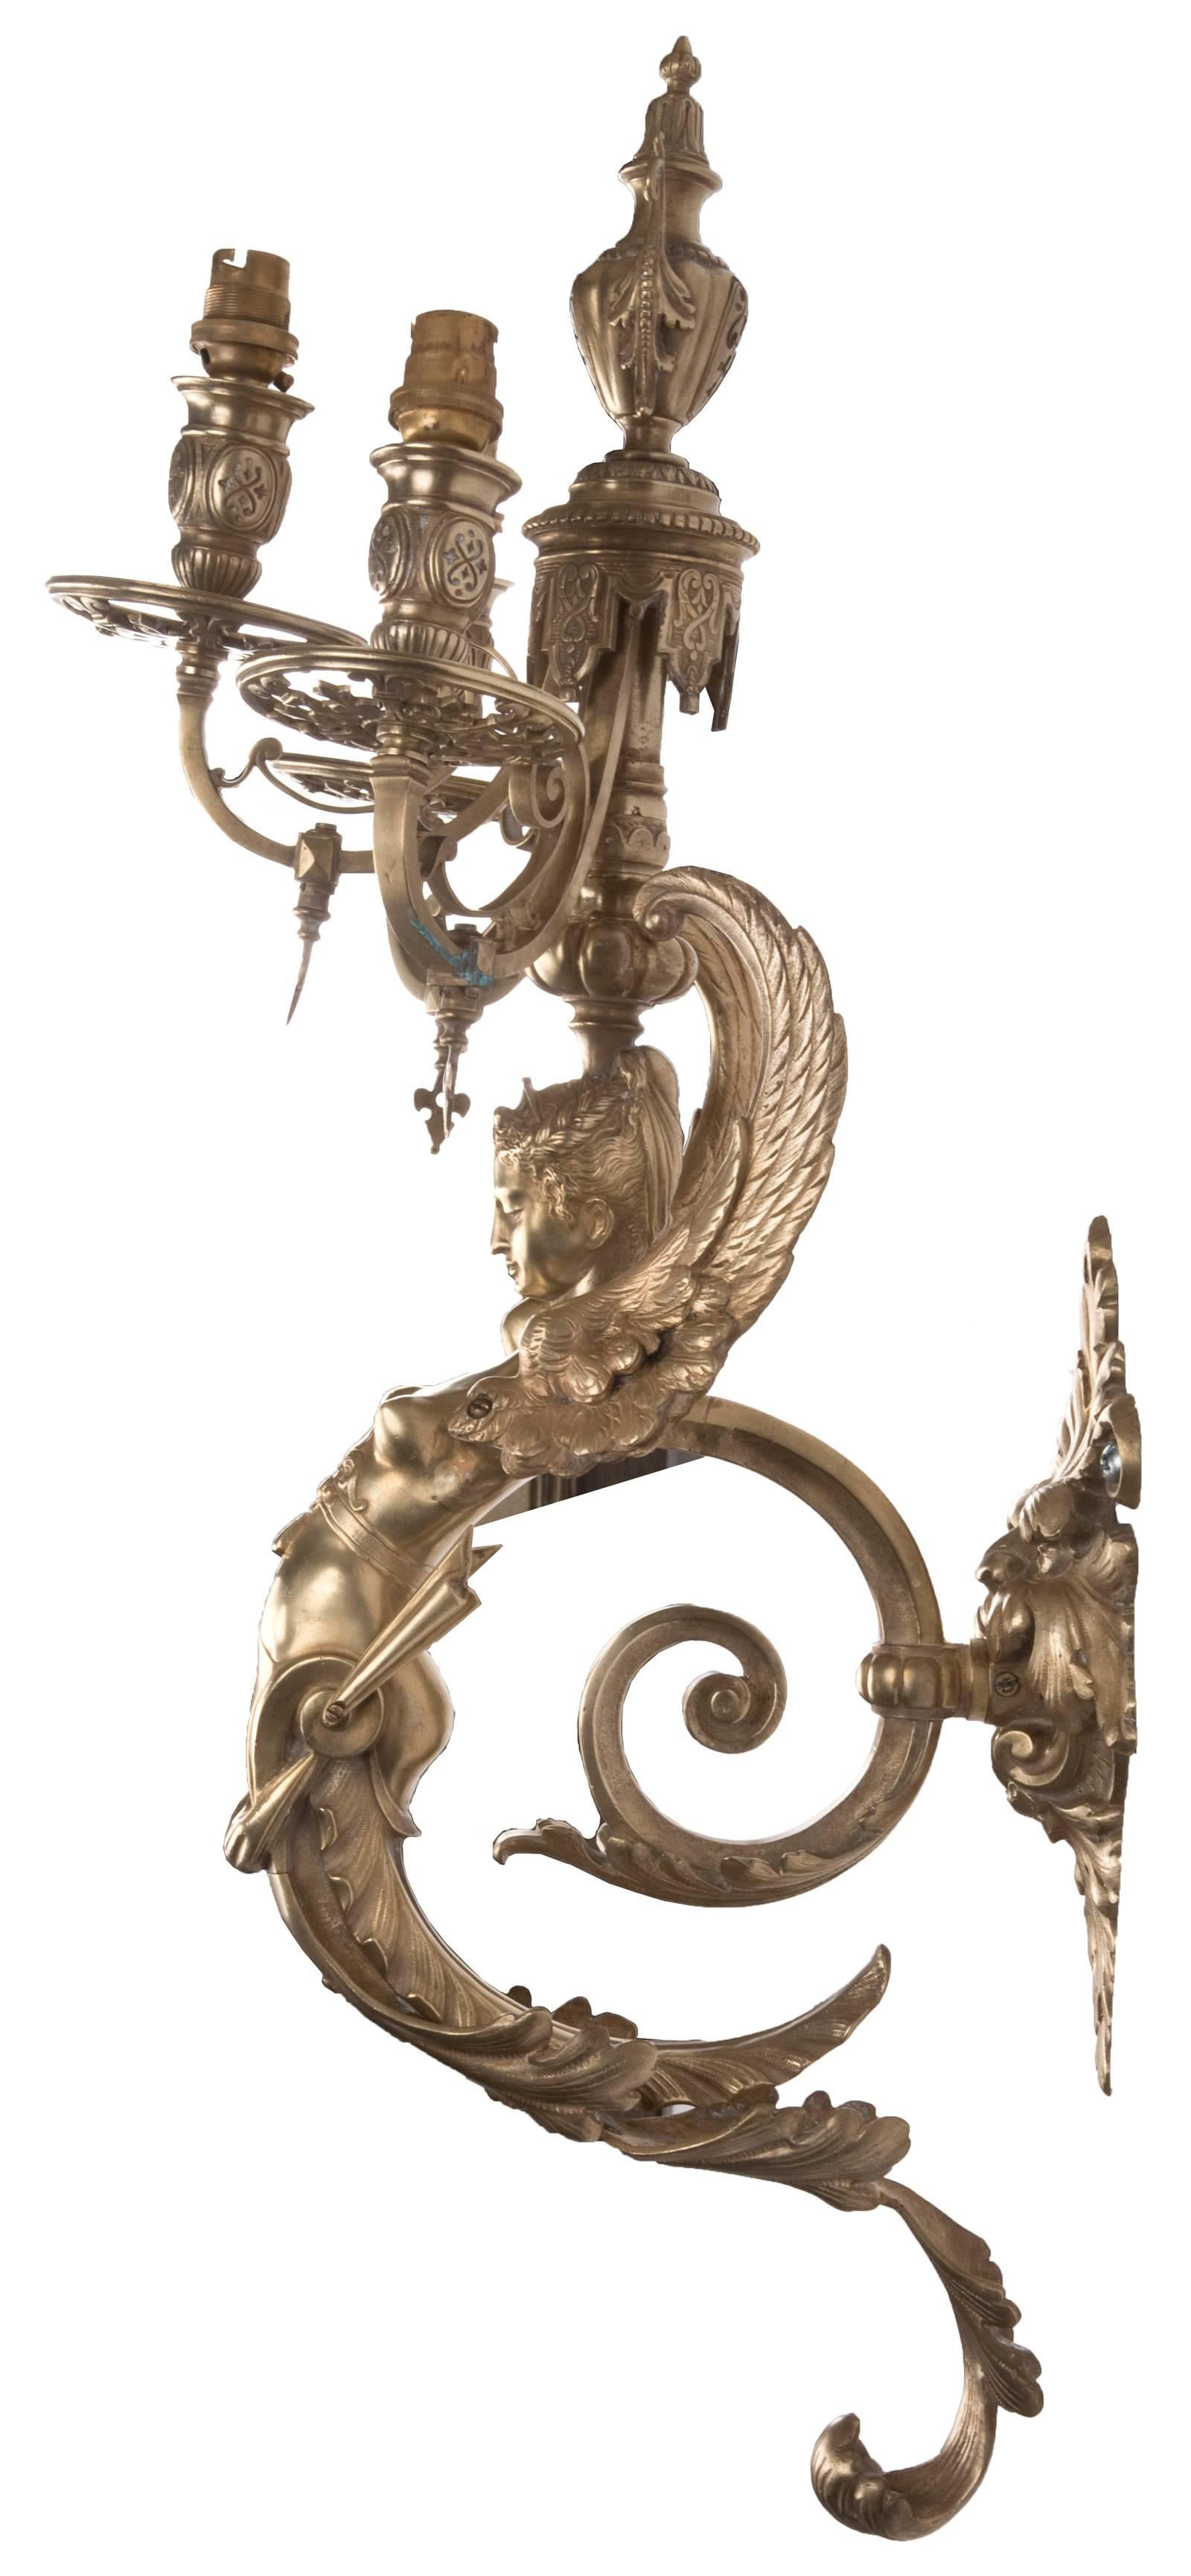 ornate wall sconces